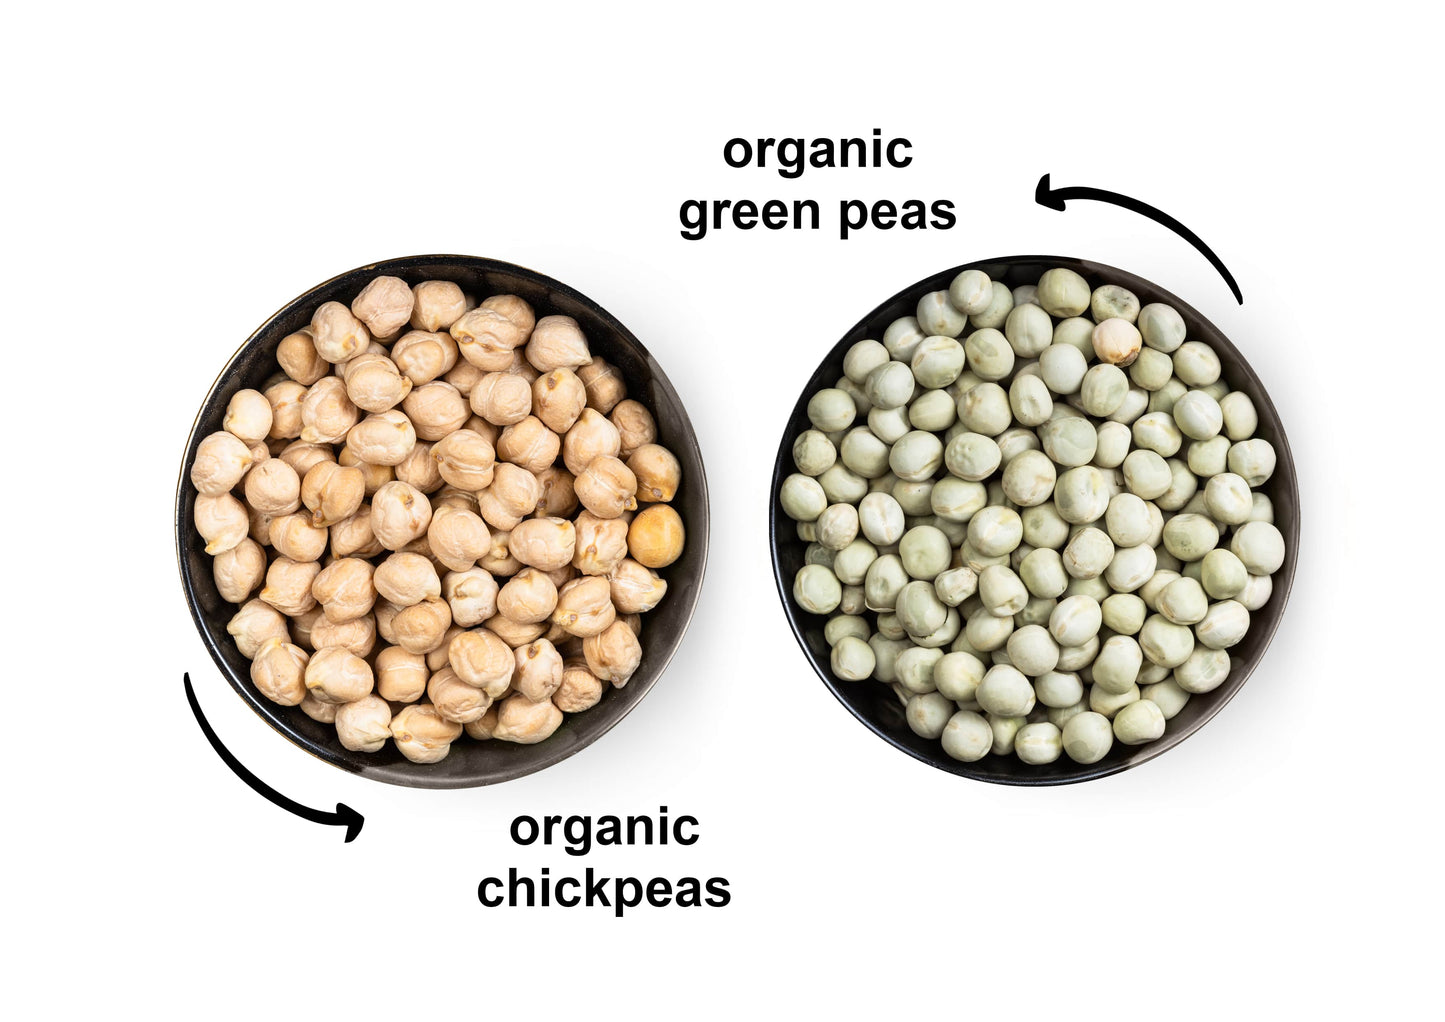 Organic Pulses Bundle, 2 Pack – Organic Chickpeas (5 LB), Organic Whole Green Peas (5 LB), Dried Non-GMO Garbanzo Beans and Peas, Raw, Vegan, Kosher, Sproutable, Bulk. Rich in Fiber and Protein